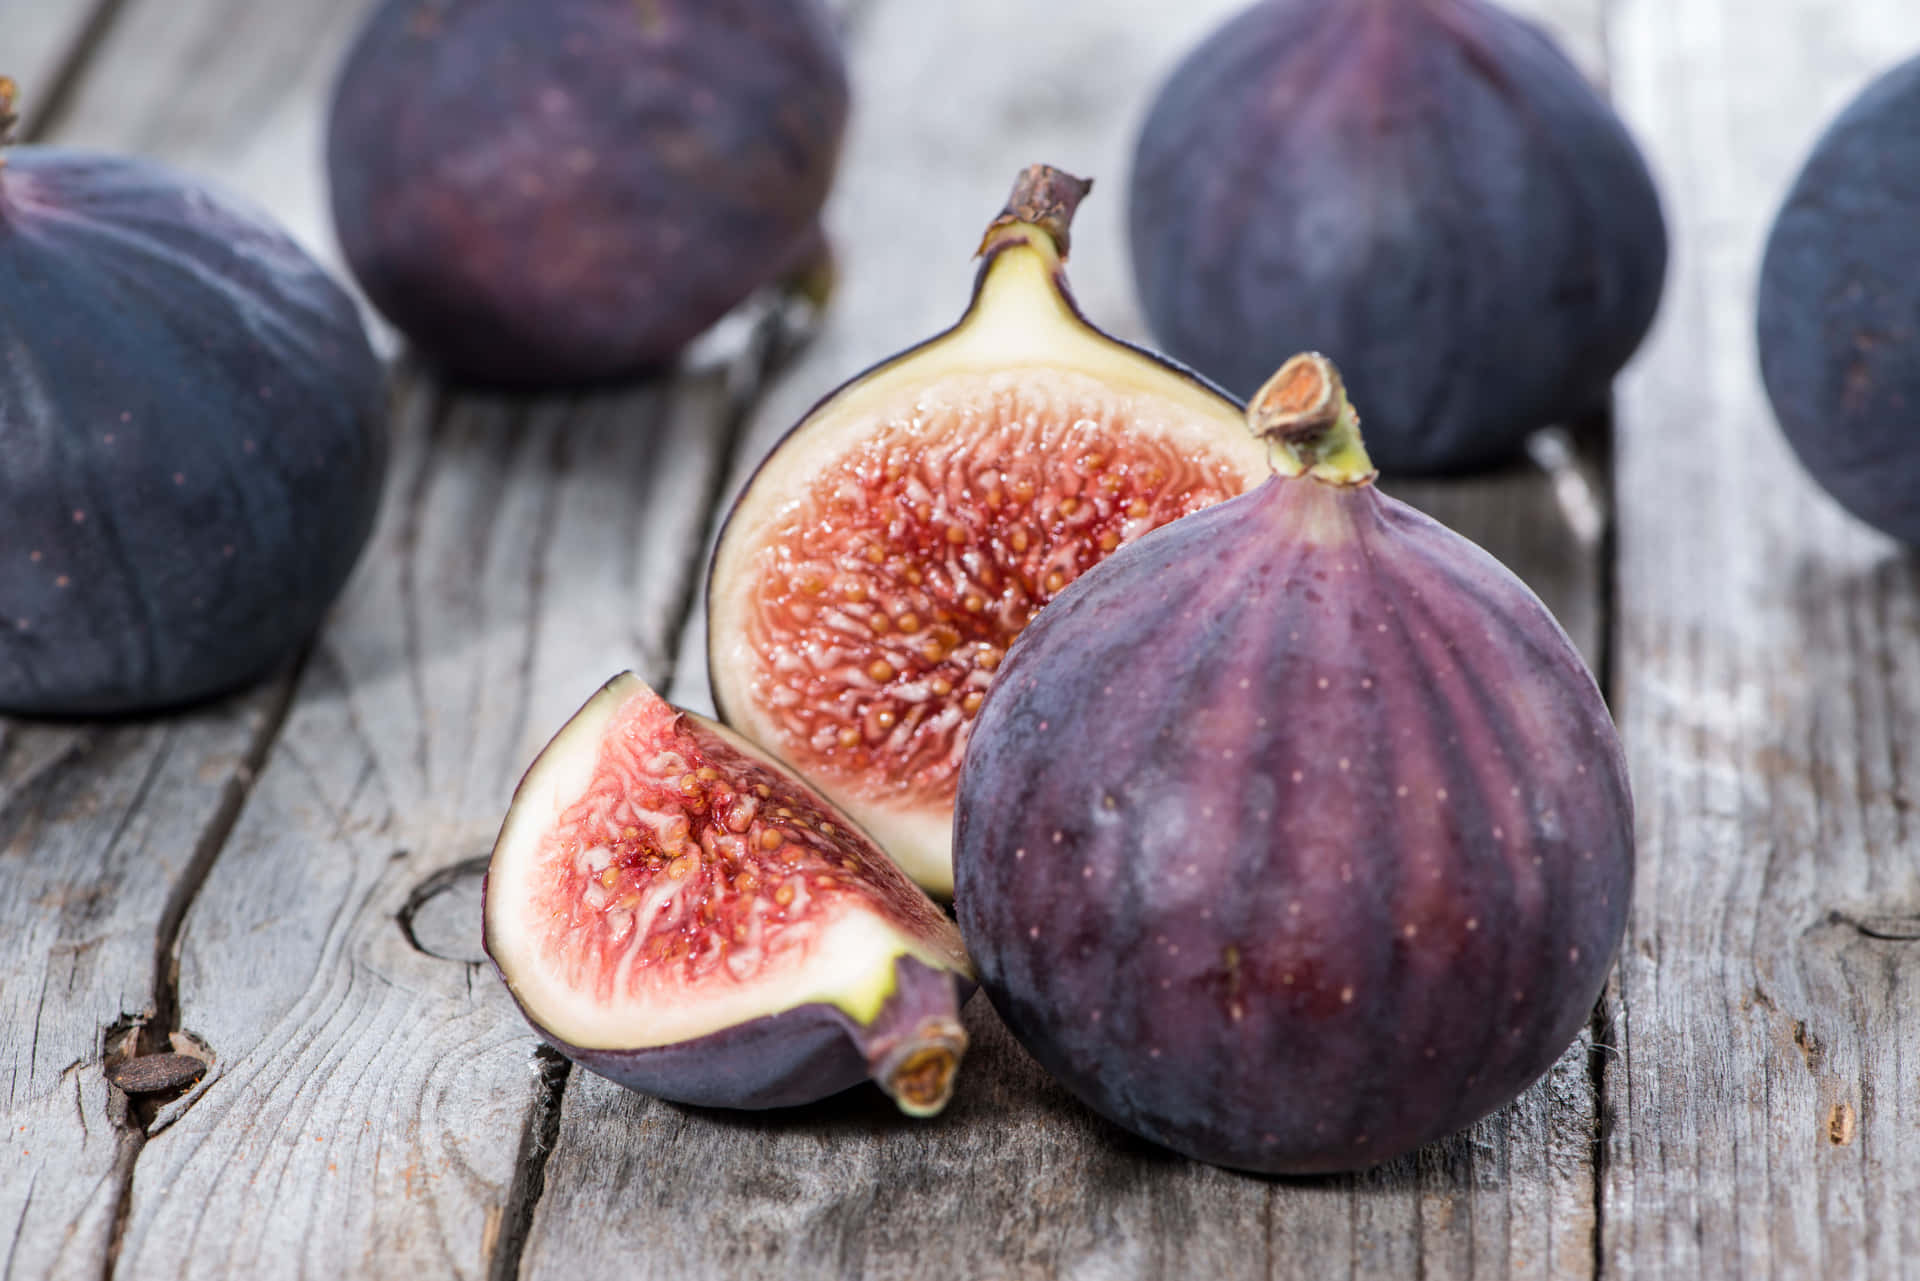 Vibrant purple figs, ripe and ready to enjoy. Wallpaper